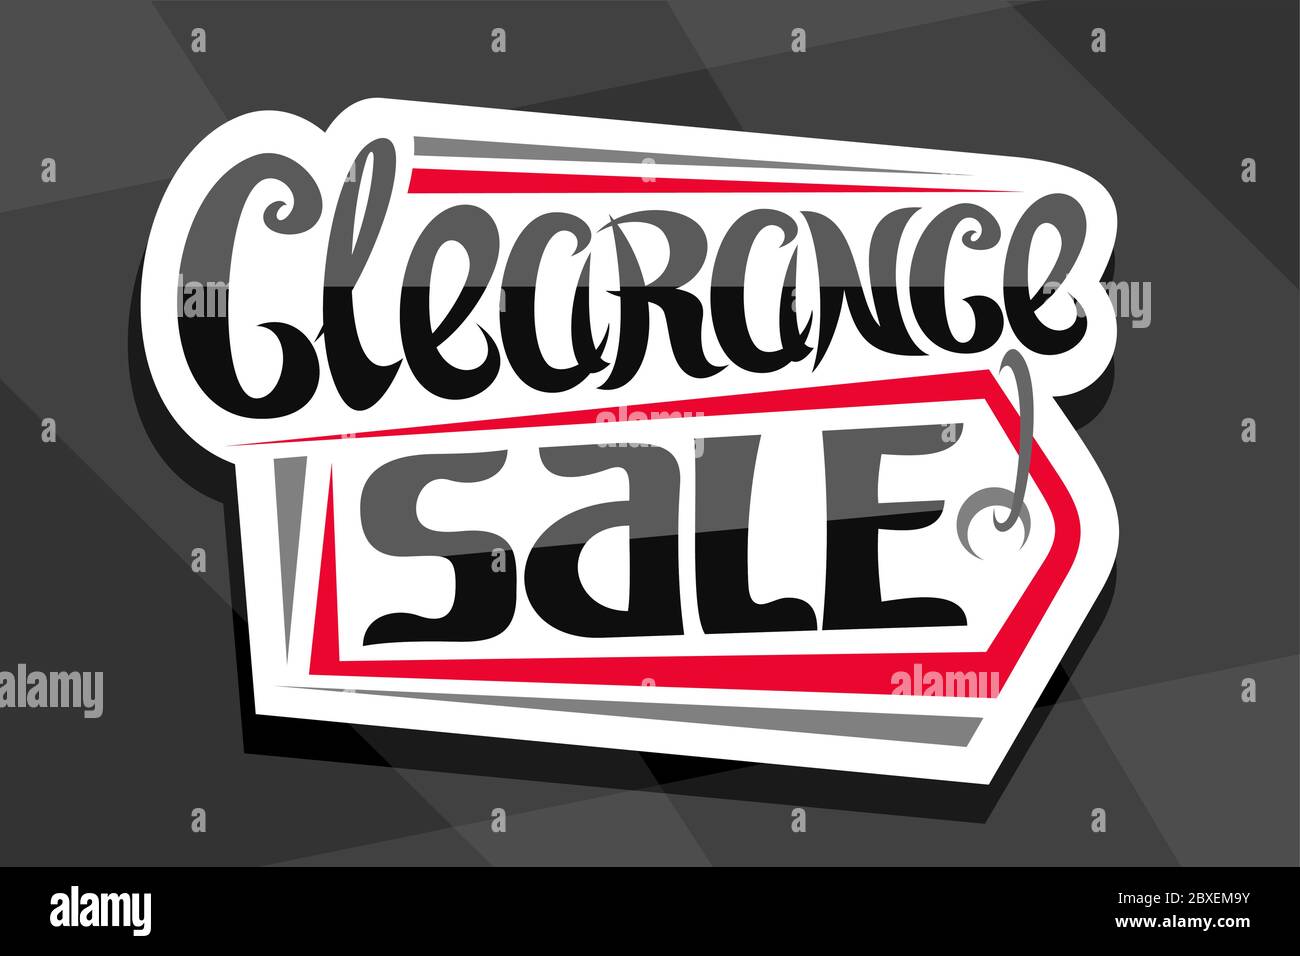 Clearance sale symbol special offer price sign Vector Image